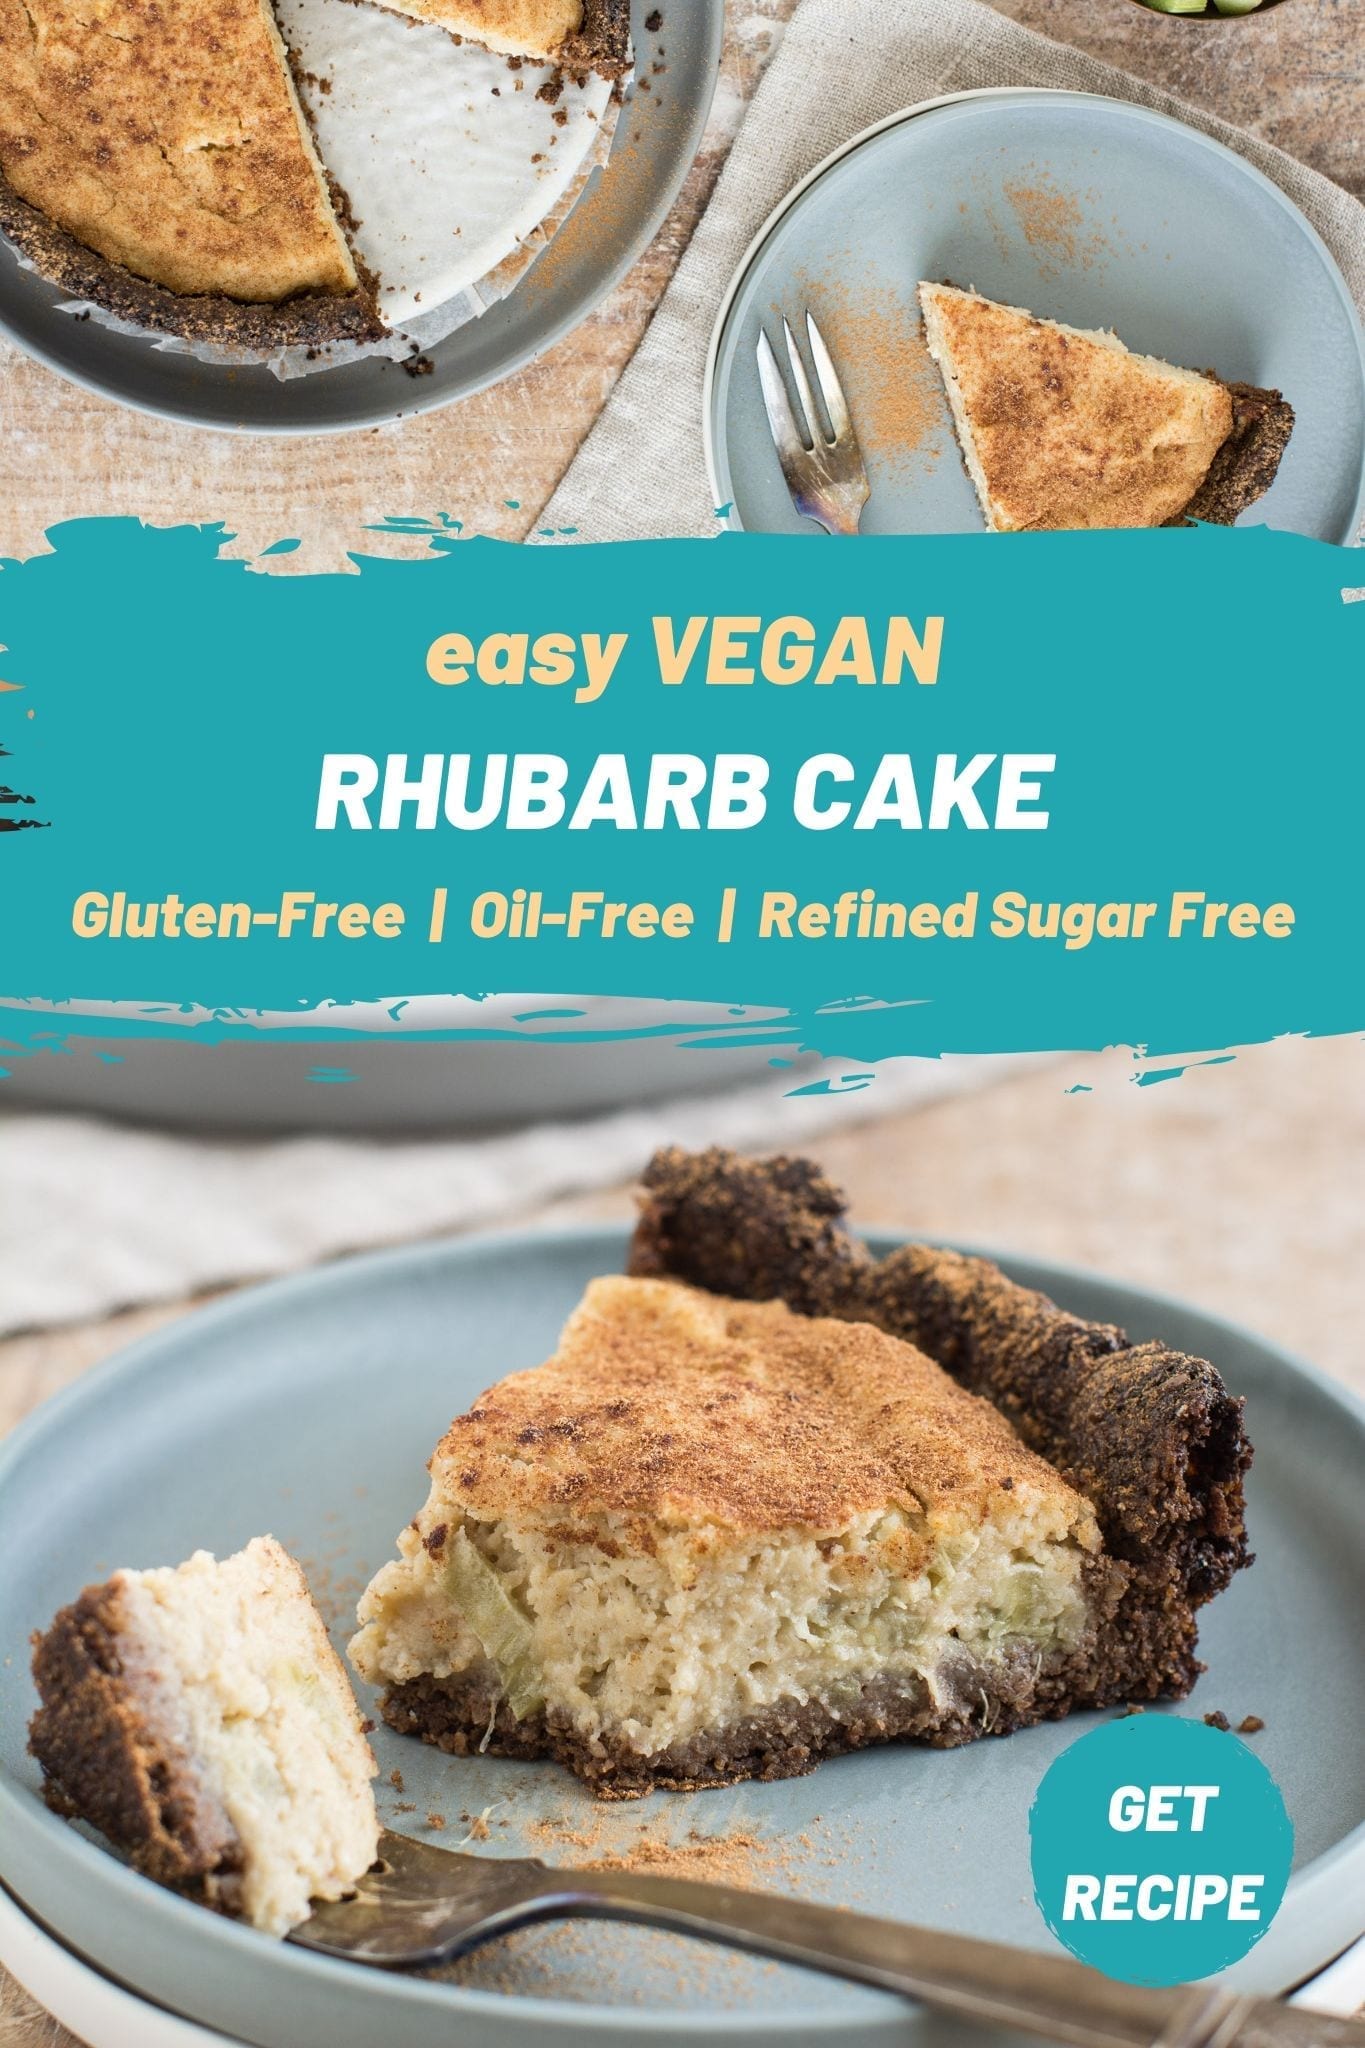 This easy gluten-free vegan rhubarb cake has only 10 ingredients and doesn’t require advanced baking skills. The dairy free filling is creamy and moist perfectly combining the sweetness of the batter and sourness of rhubarb. 